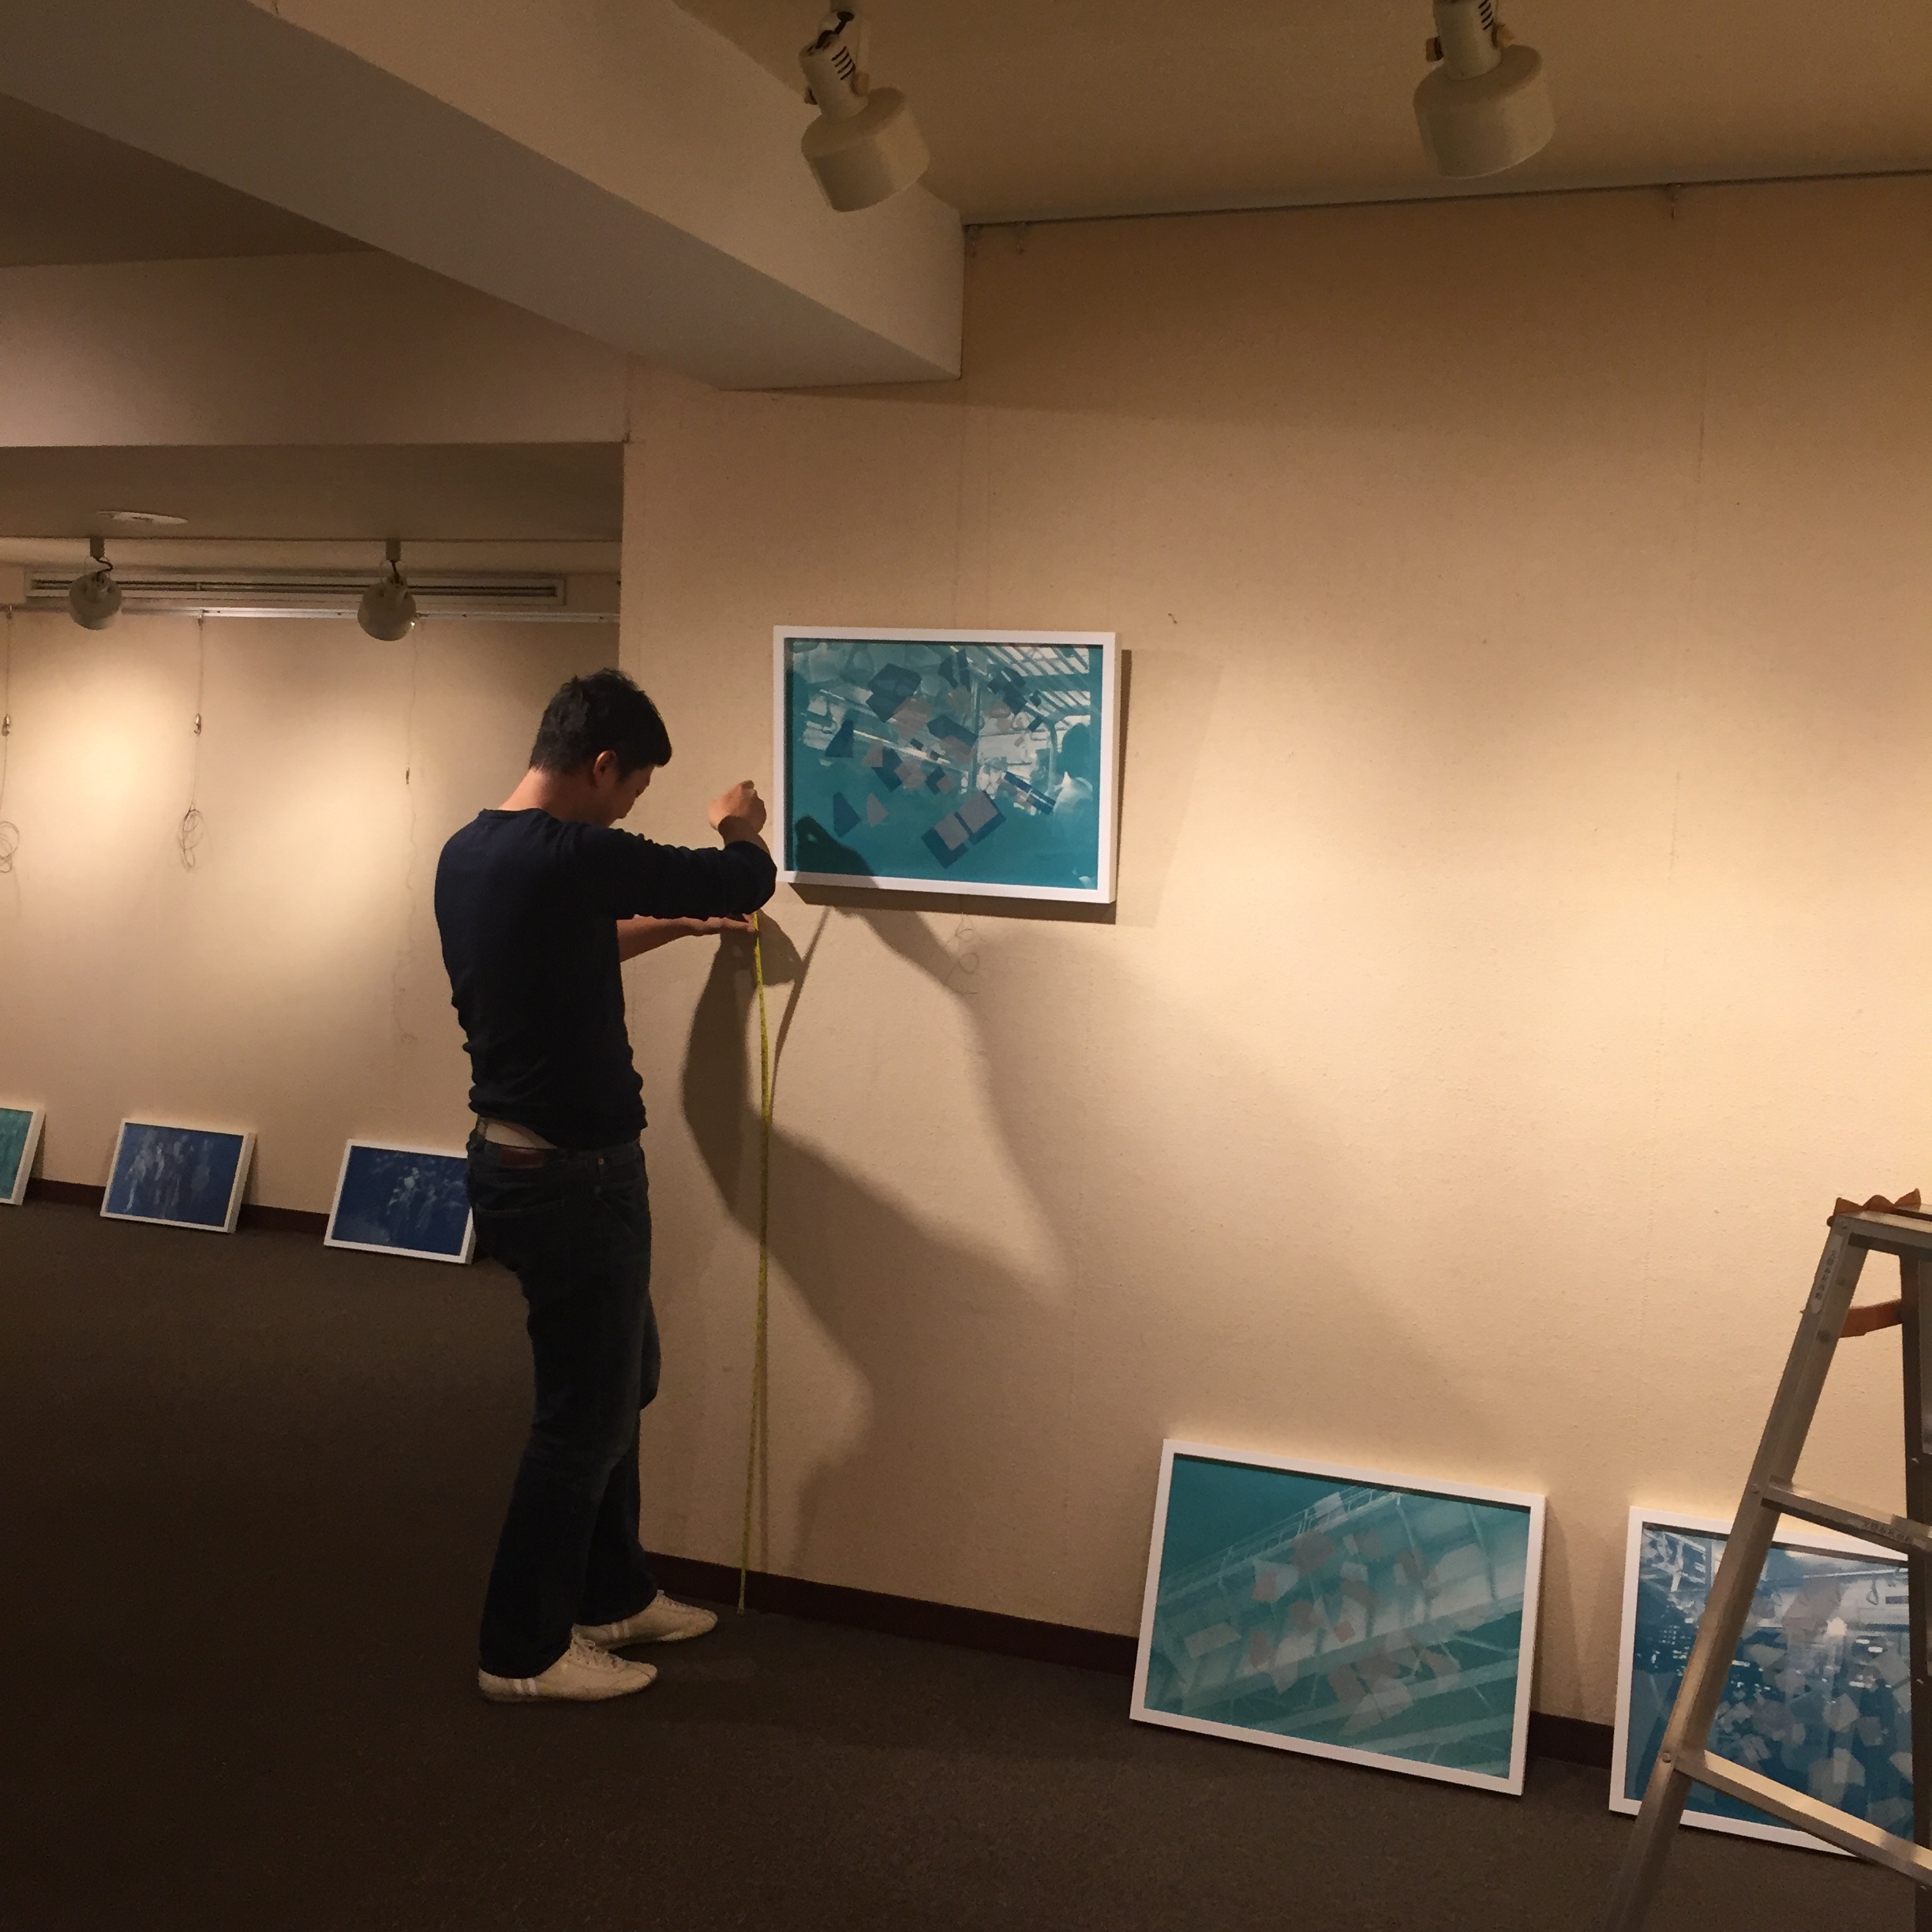 Hanging the show, my good friend put up my works!